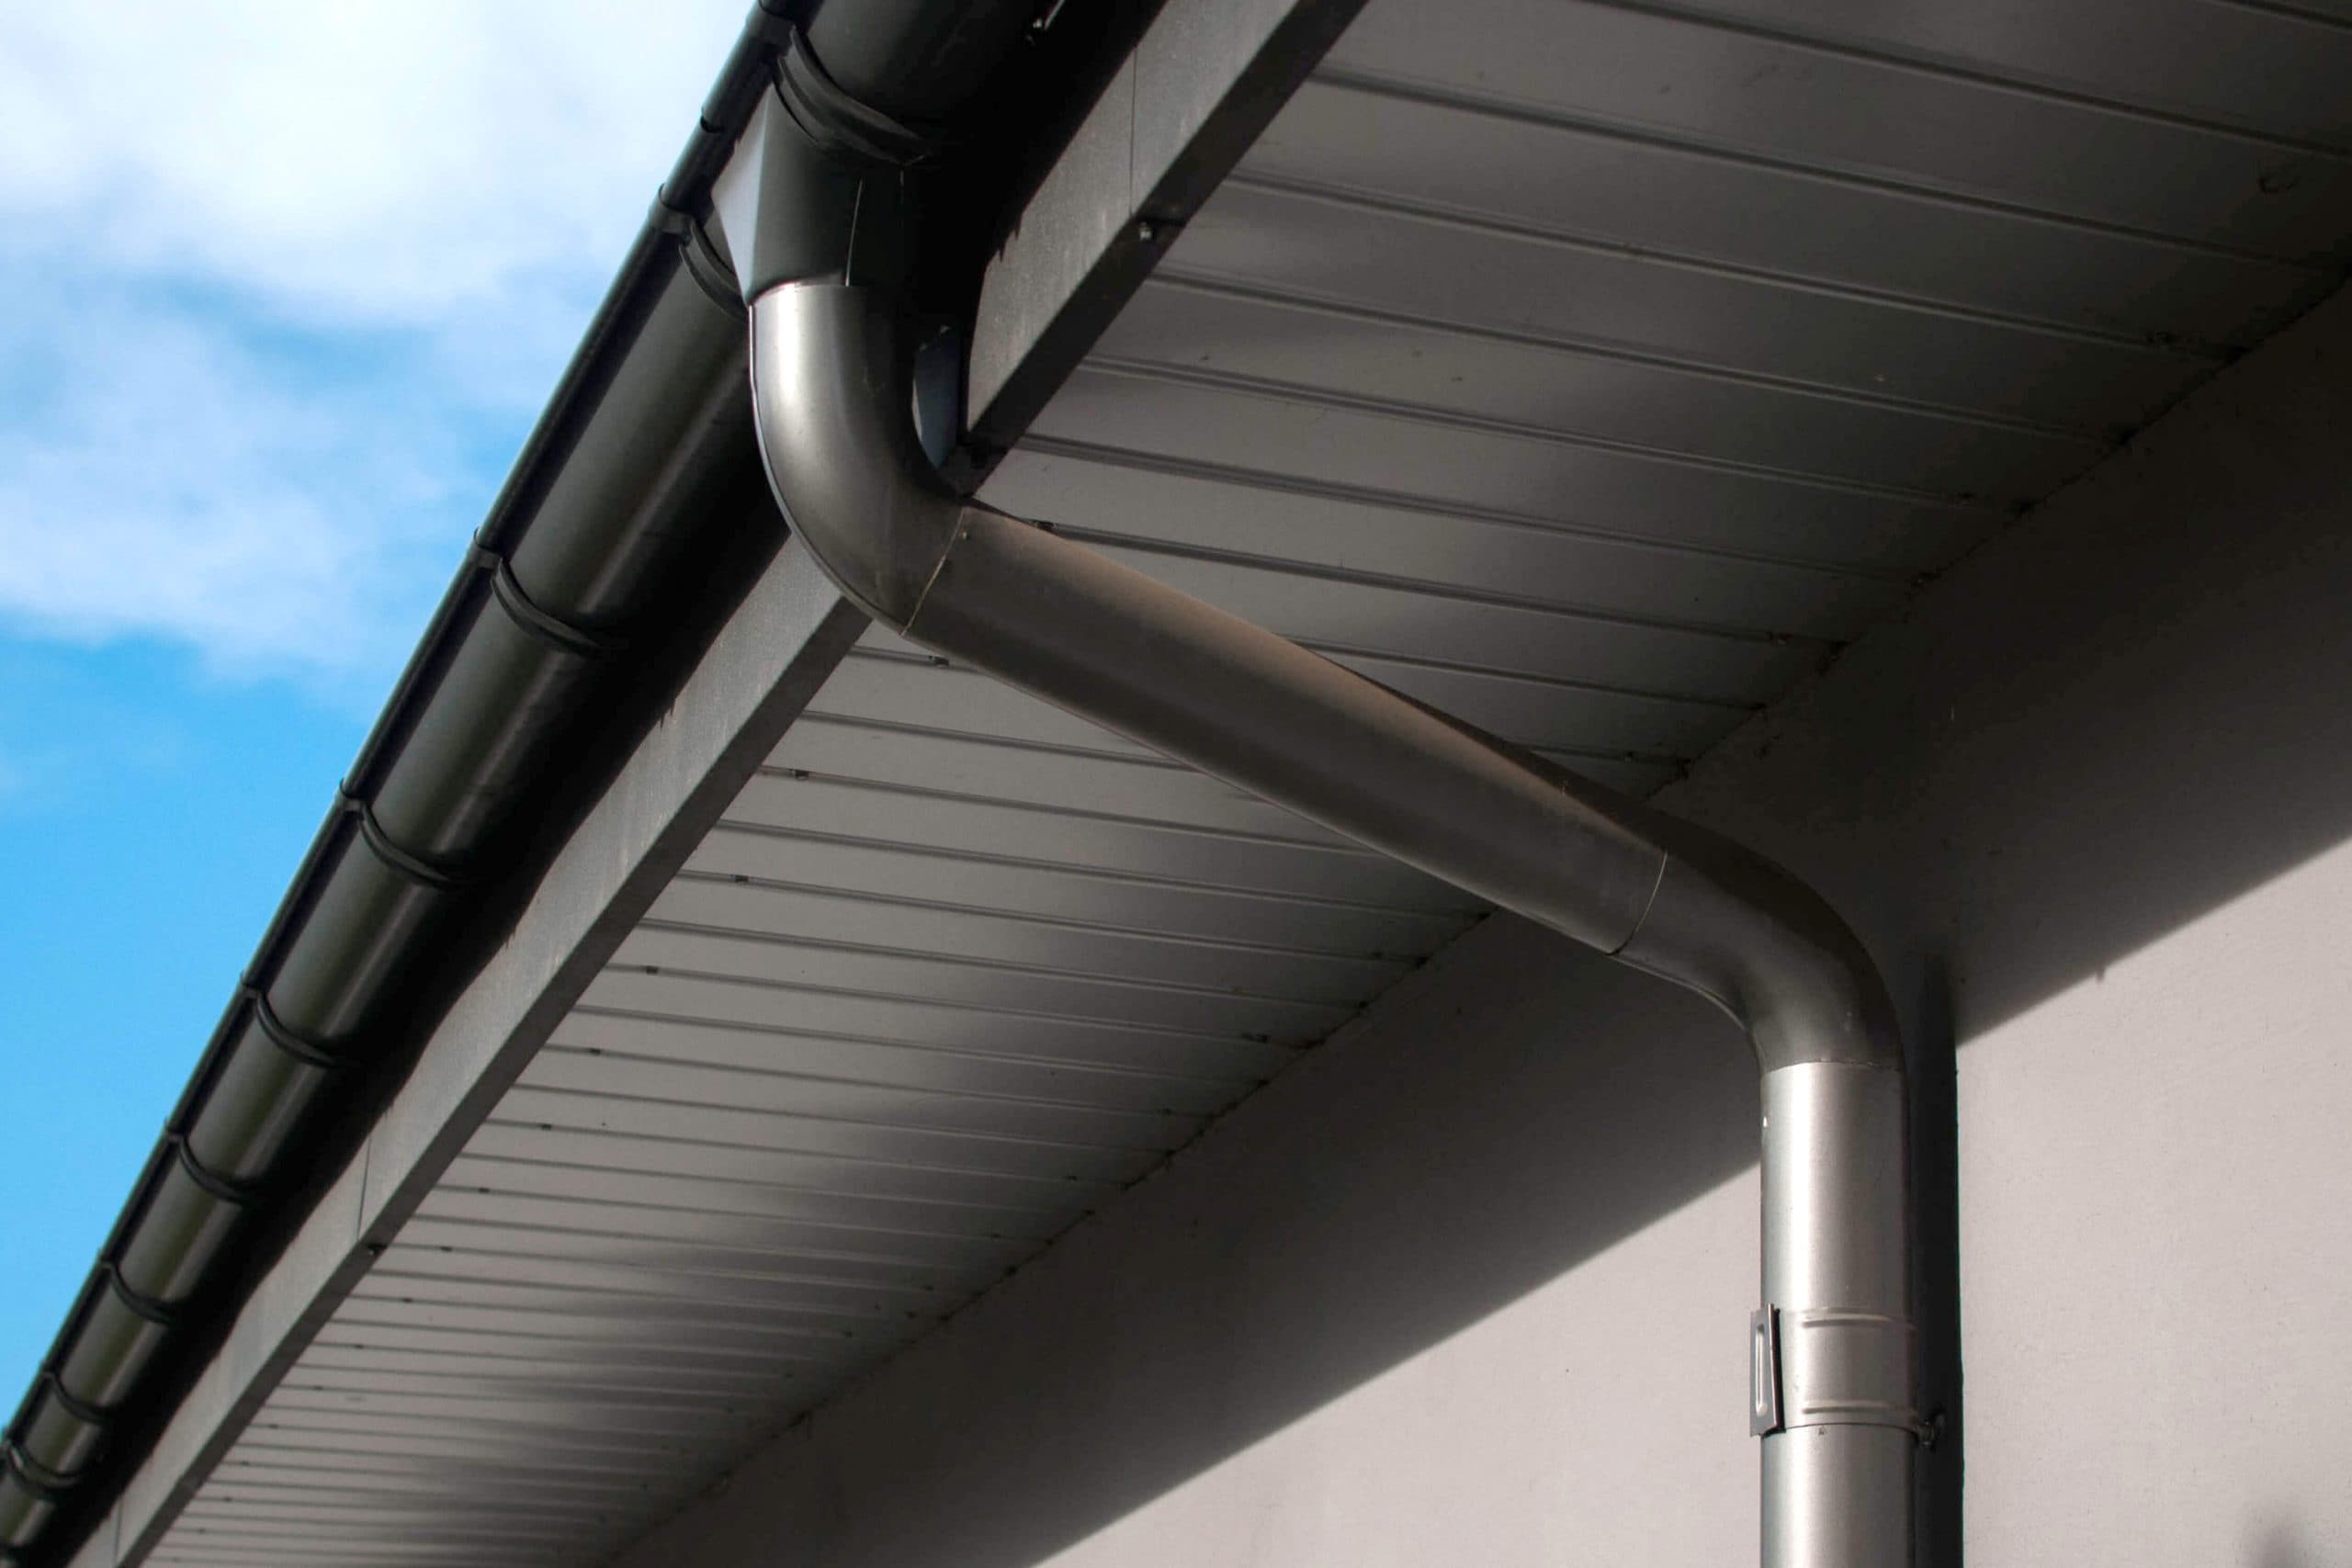 Reliable and affordable Galvanized gutters installation in Fredericksburg